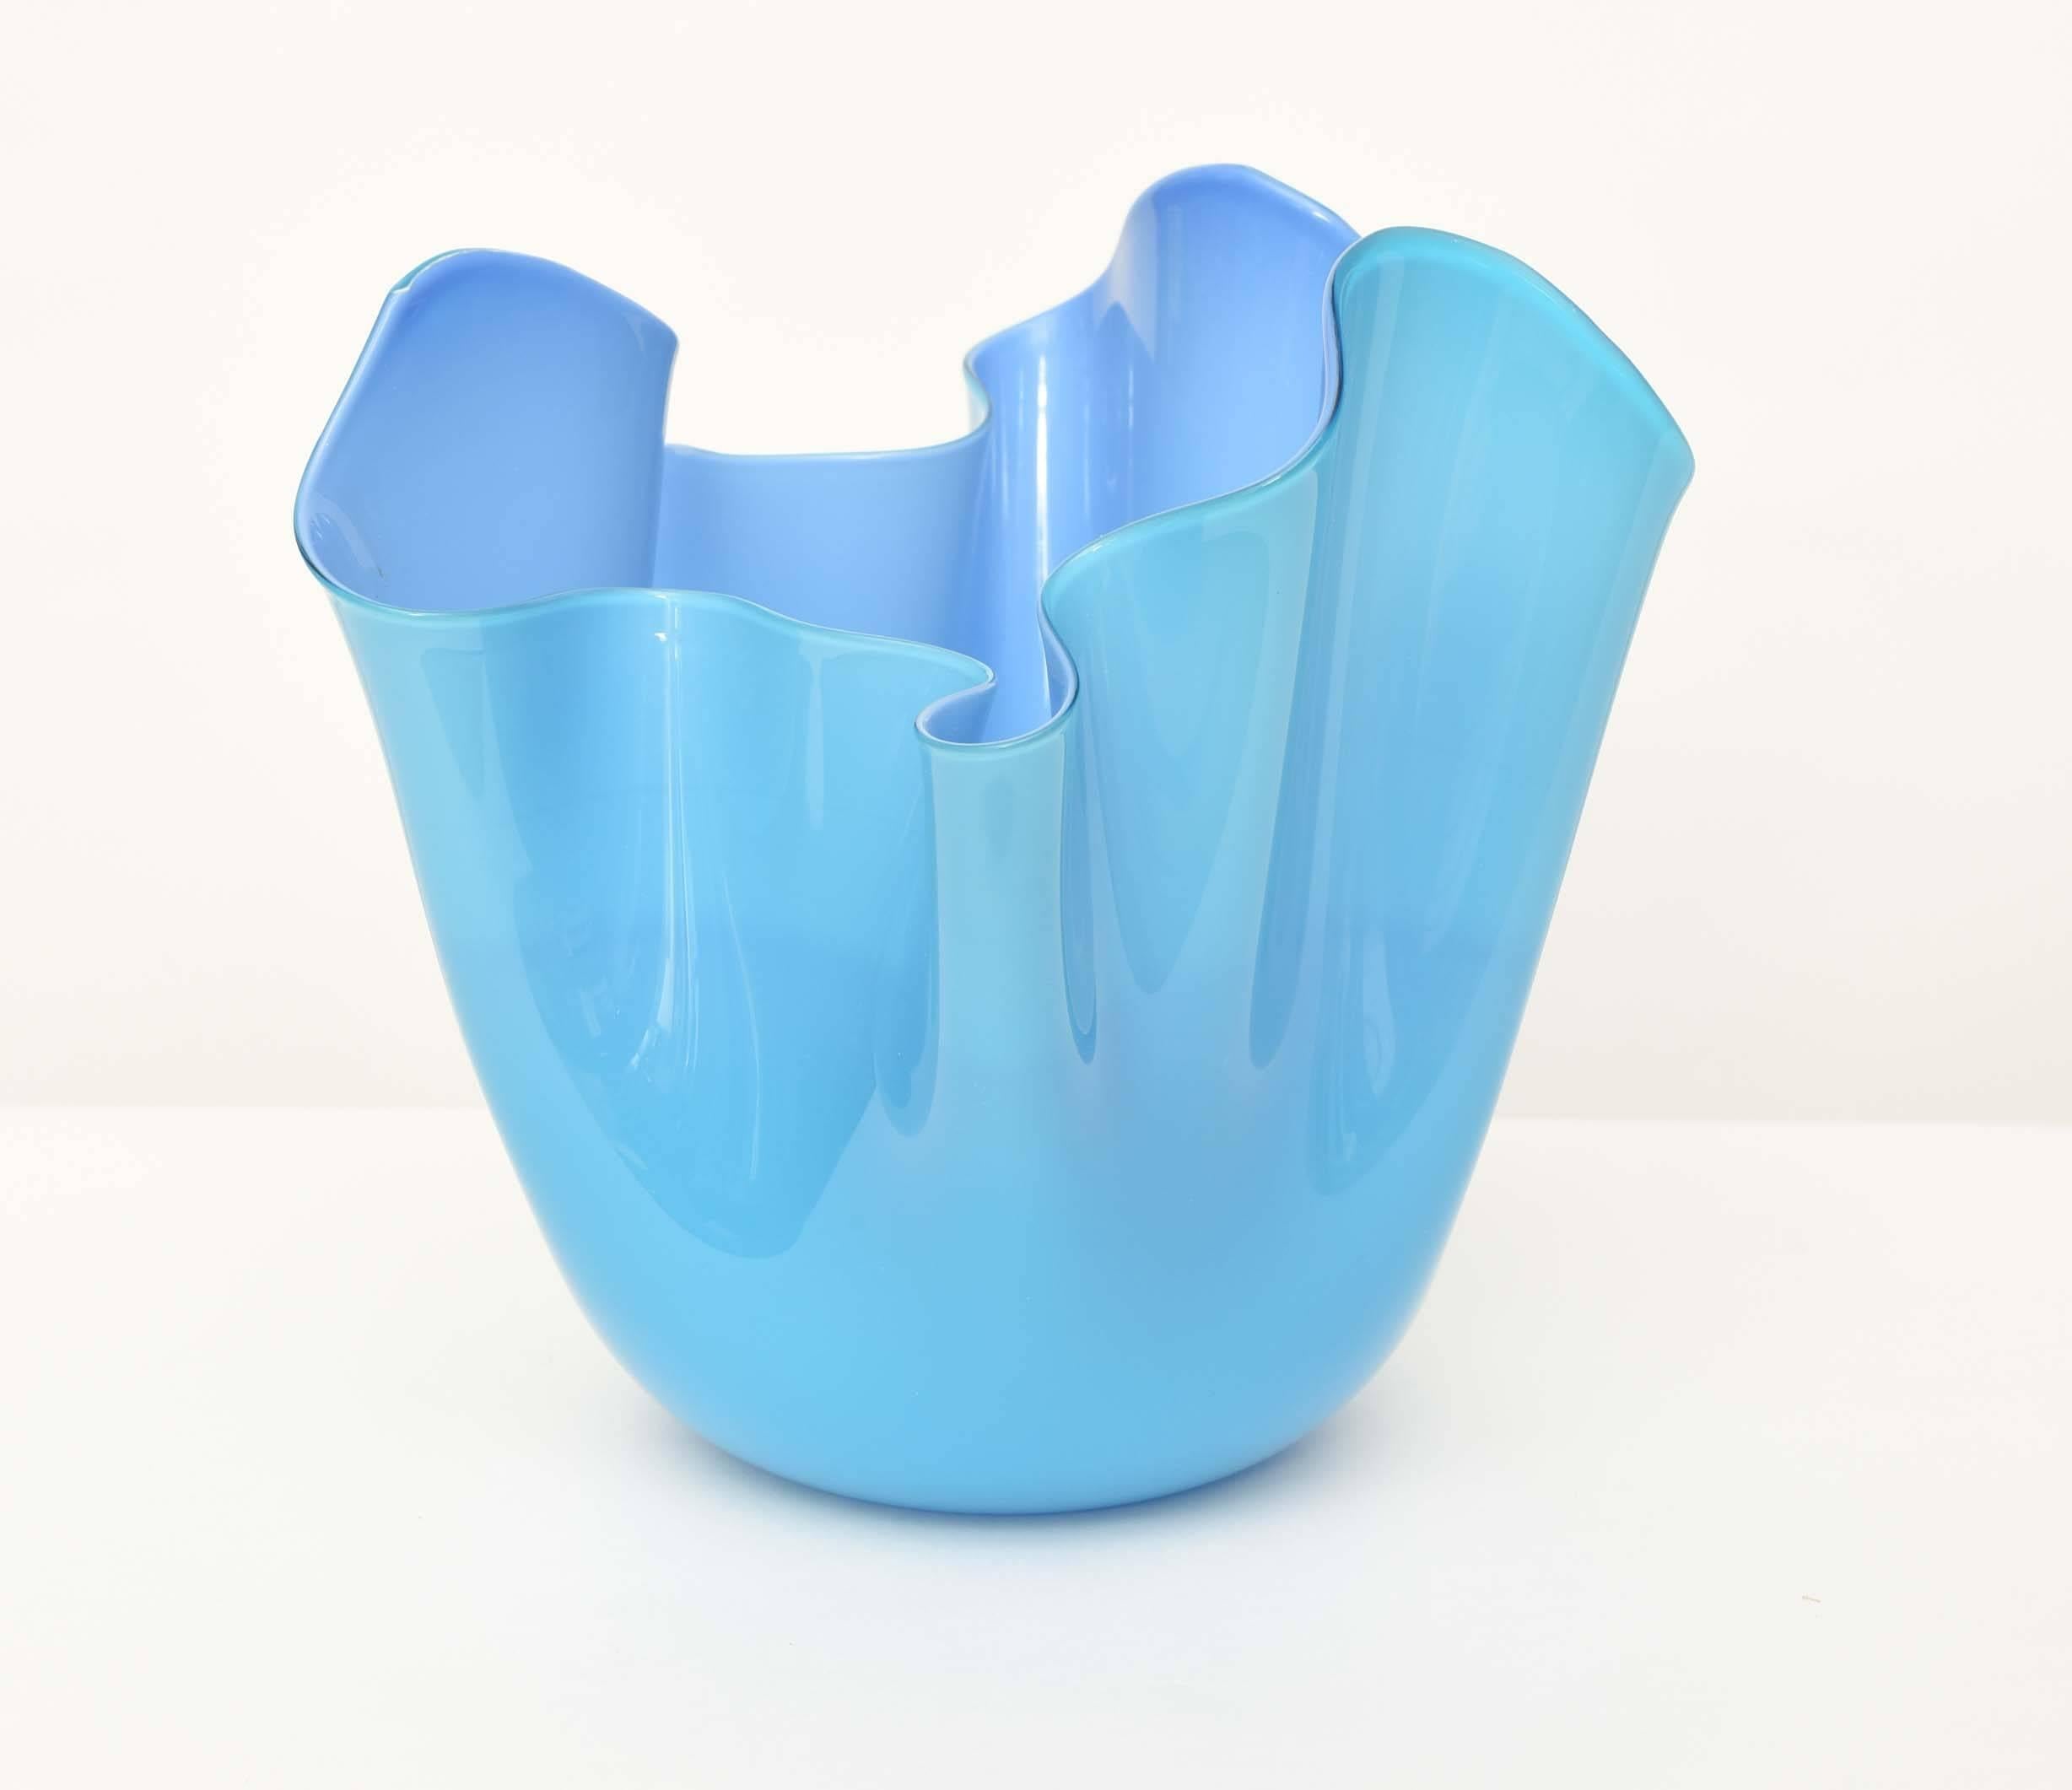 Perfectly executed Fazzoletto bowl by Venini. Shades of opaline and azure blue colored glass juxtaposed on each other. Signed.